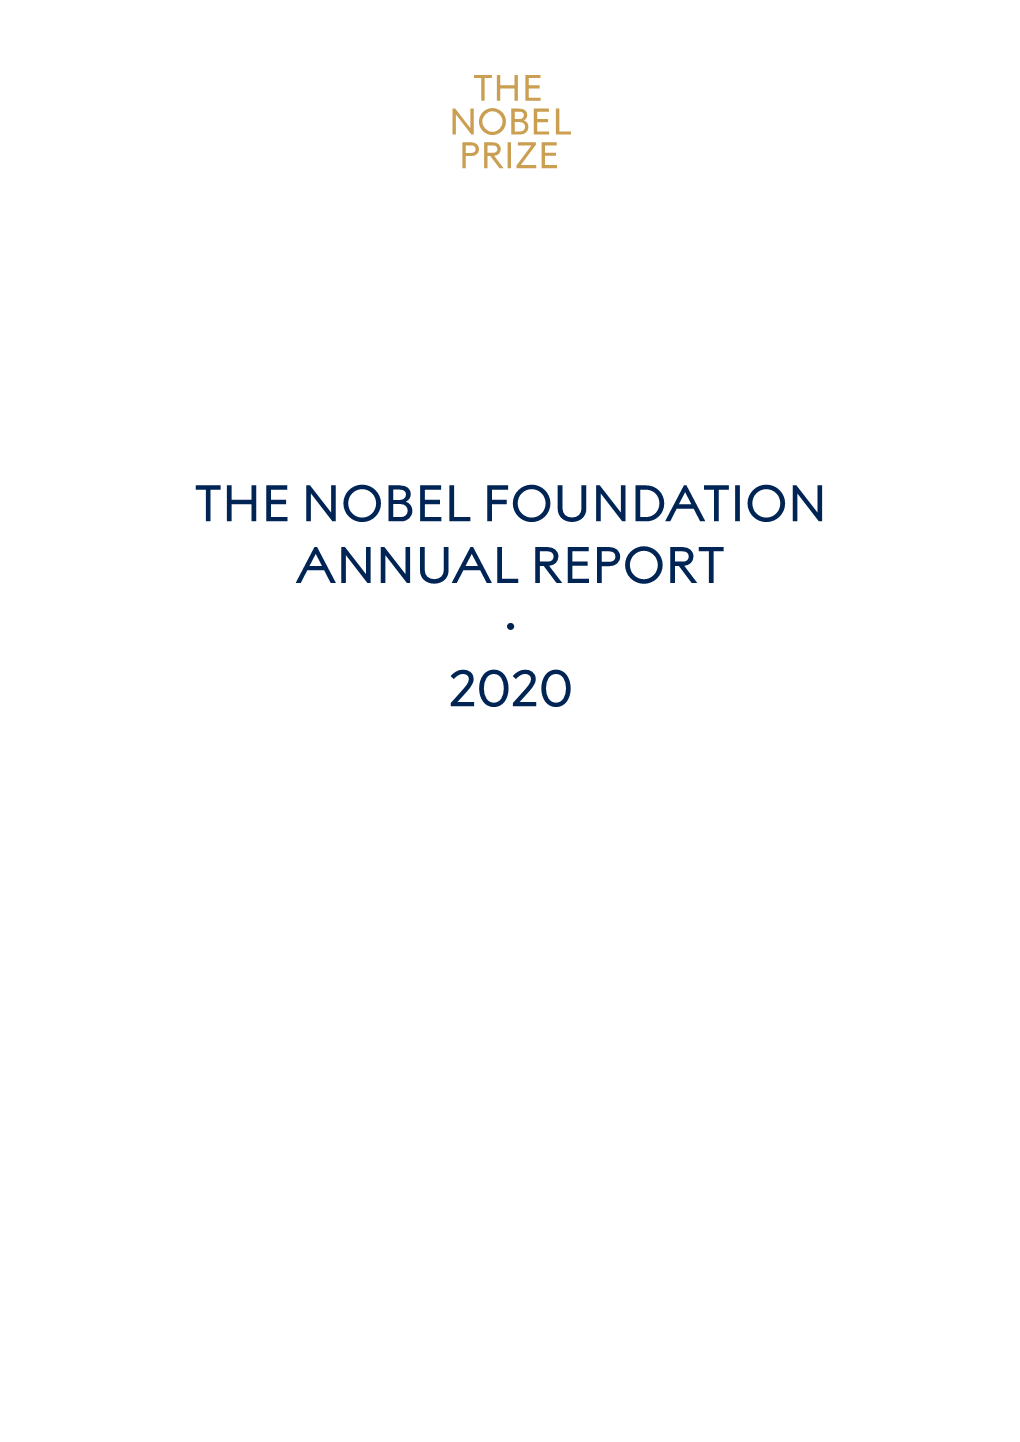 The Nobel Foundation Annual Report 2020